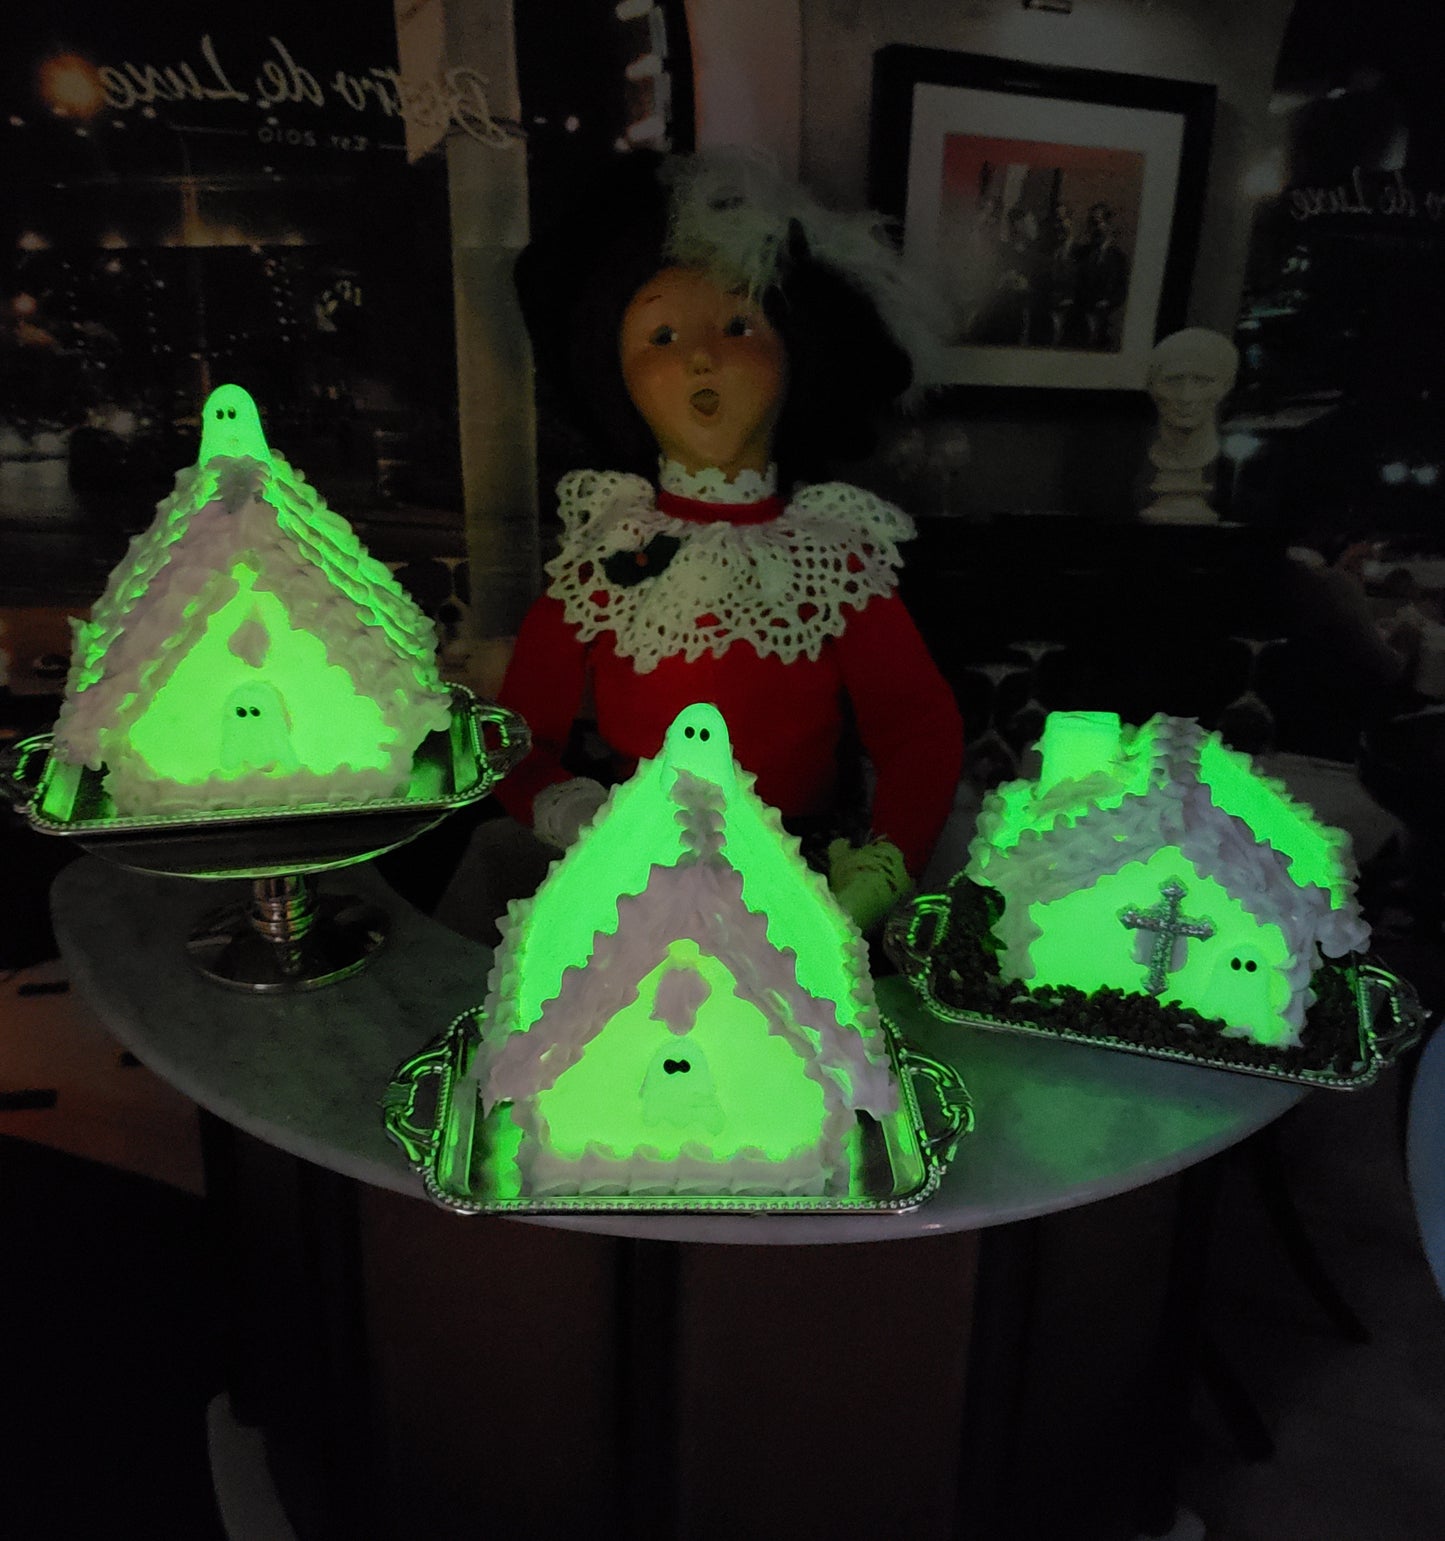 byer's choice doll with glow in the dark houses